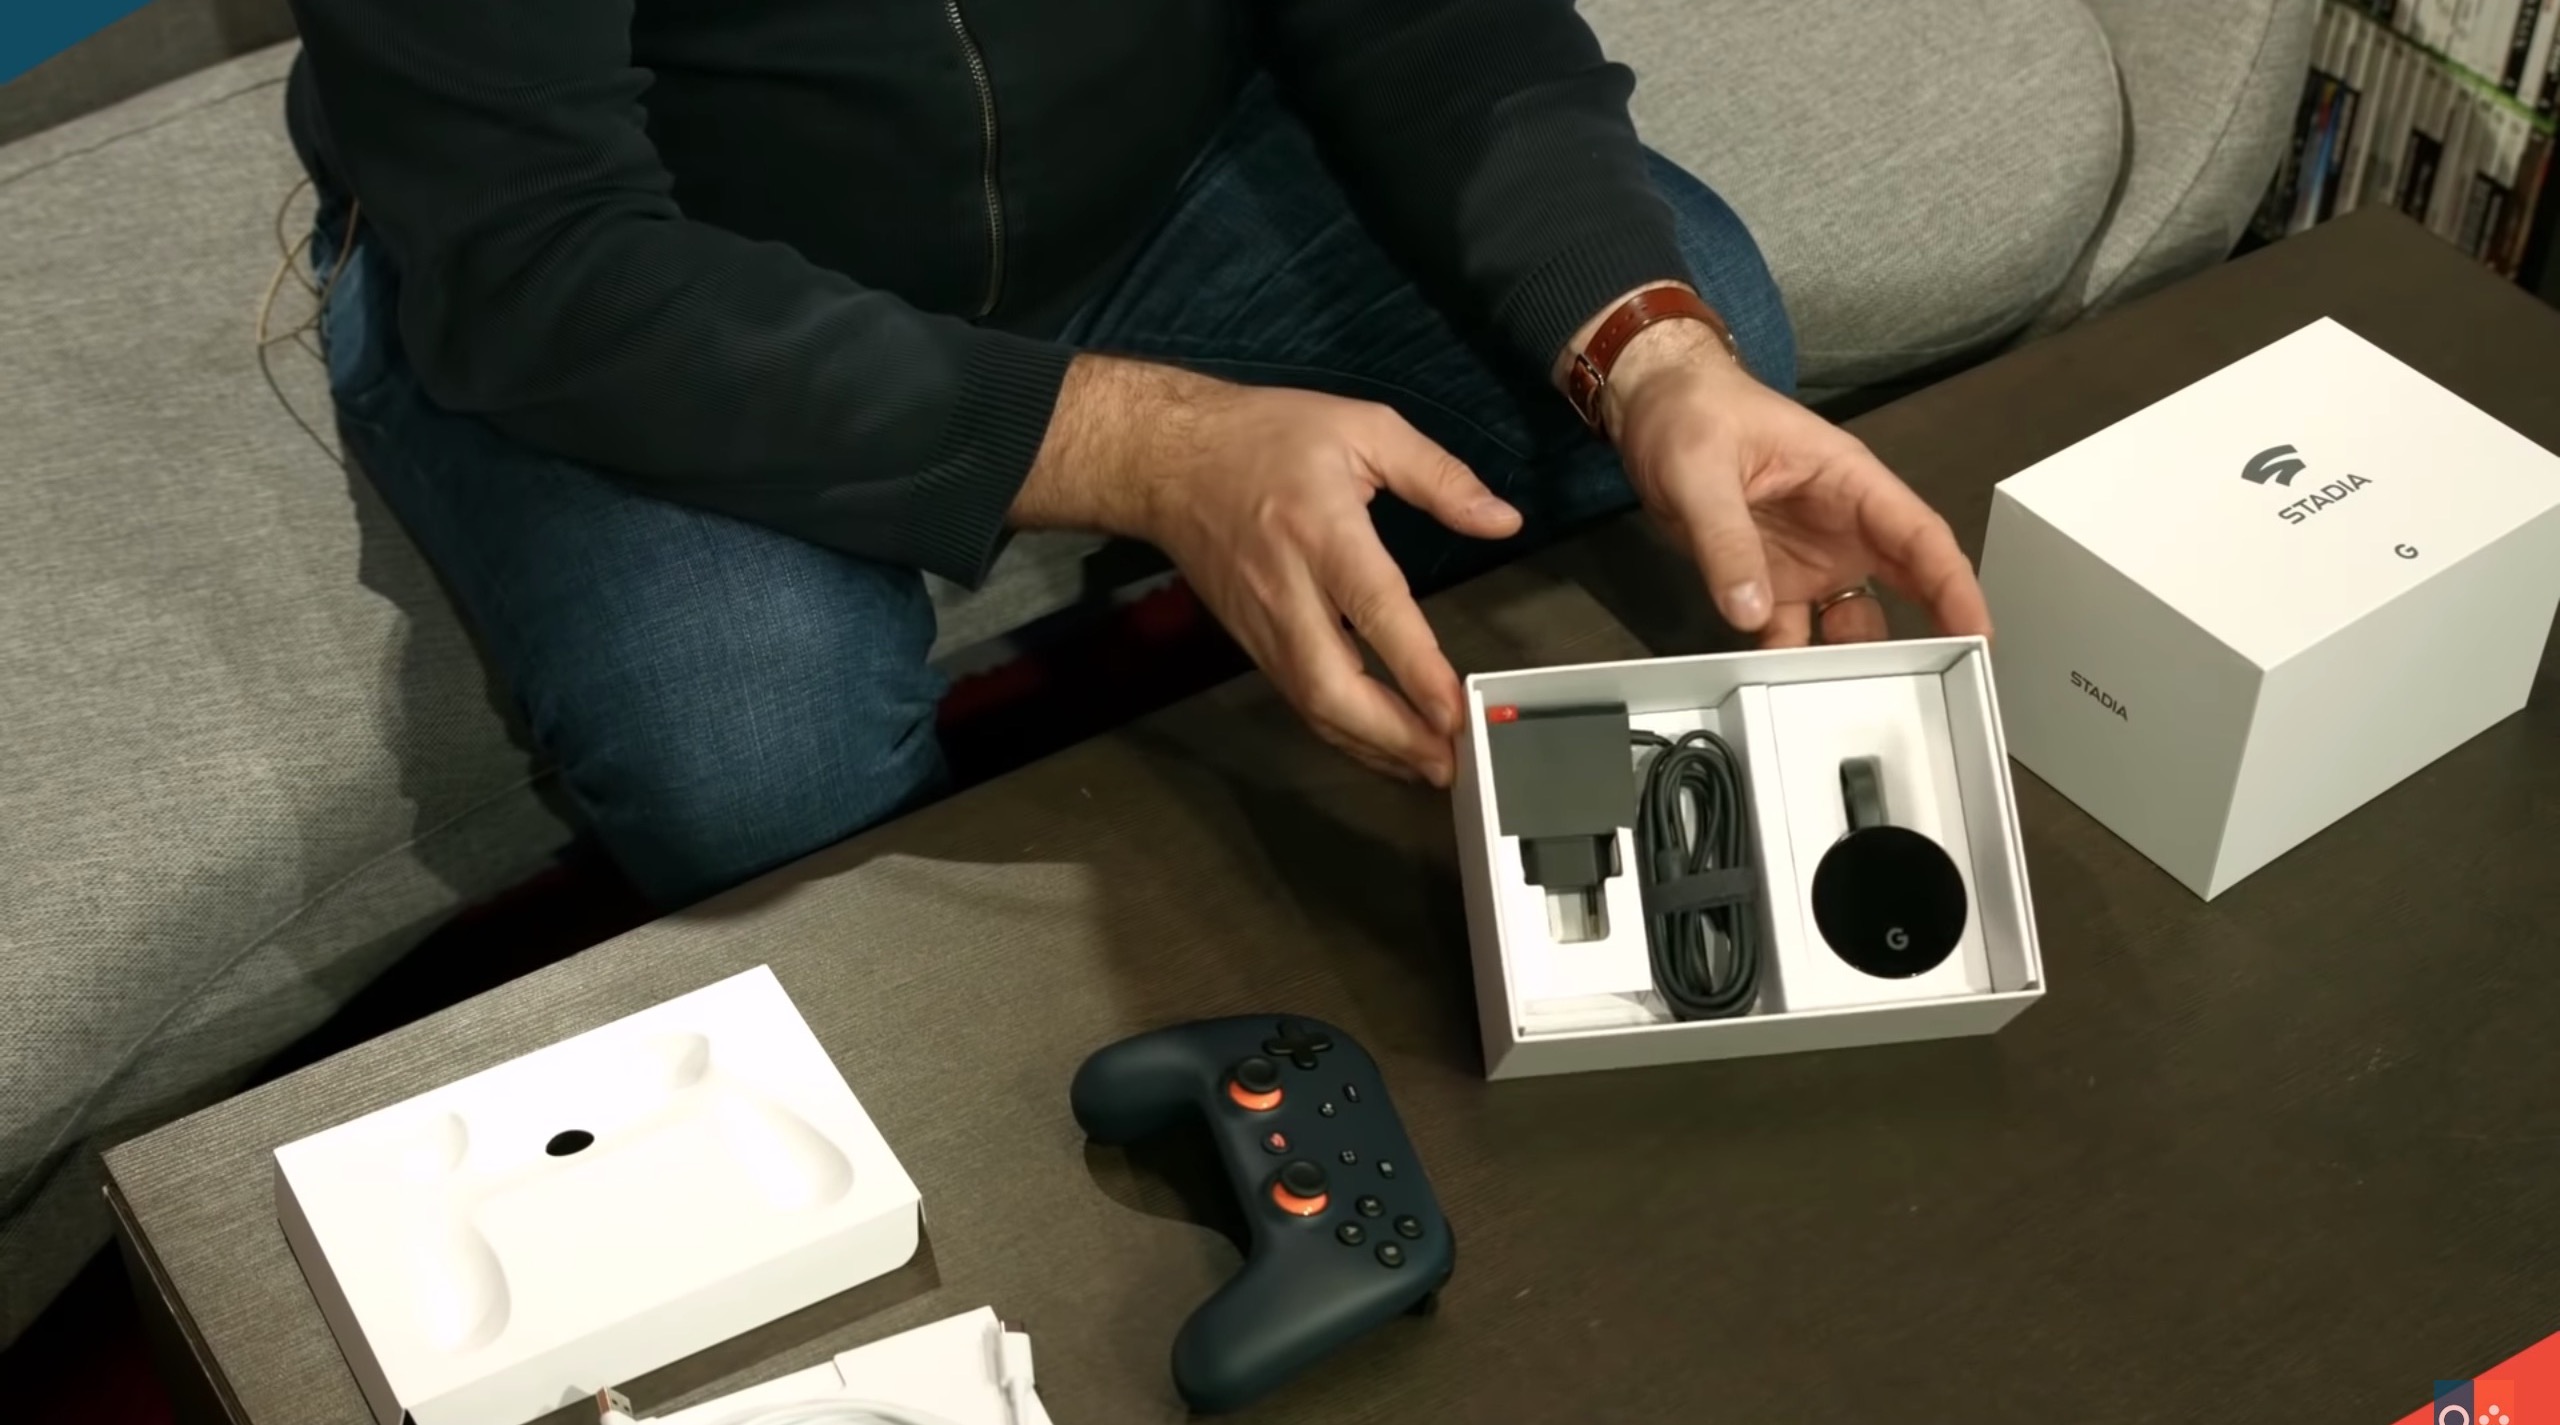 stadia-founders-edition-unboxing-4.jpg